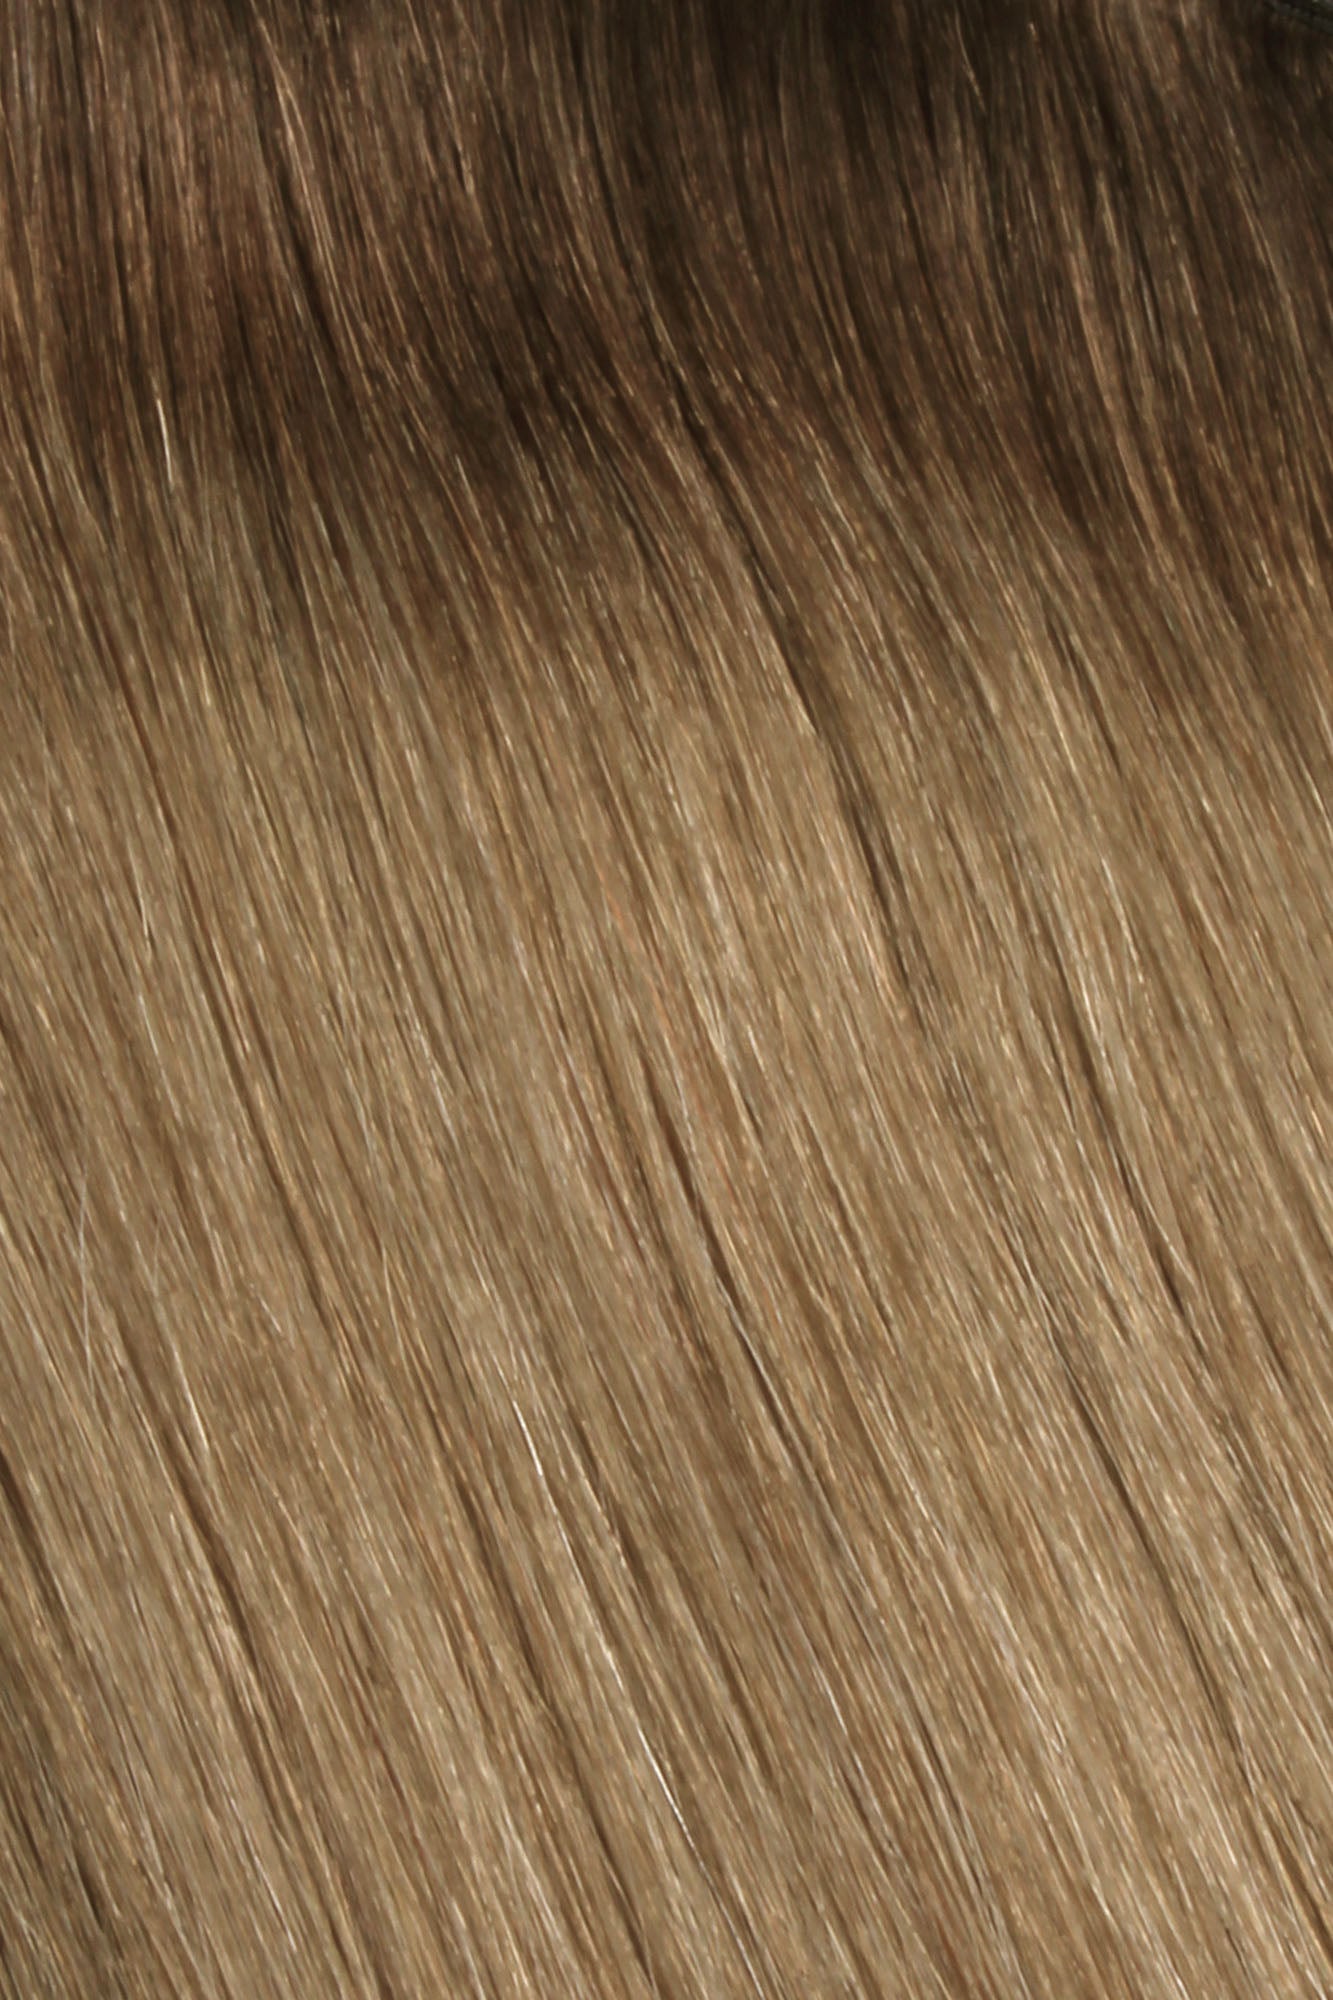 SEAMLESS® Flat Weft 16 Inches - SWAY Hair Extensions Rooted-Champagne-Chestnut-R5-8-22 Natural SEAMLESS® Flat Weft 16 Inches extensions. Thin, flexible, and discreet. 100% Double Drawn Remy Human Hair. Versatile and reusable